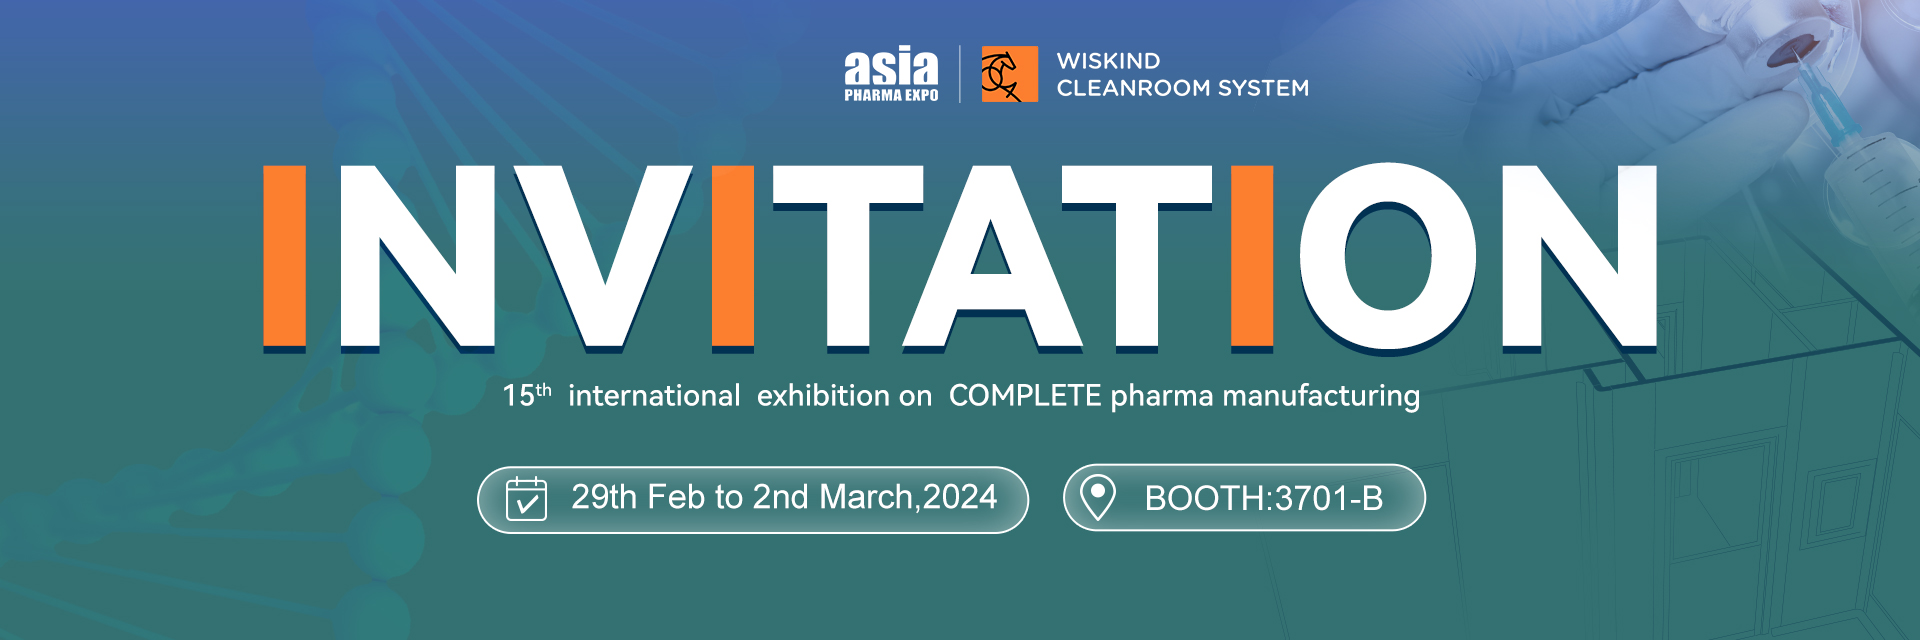 Wiskind will attend the 15th Aisa Pharma expo